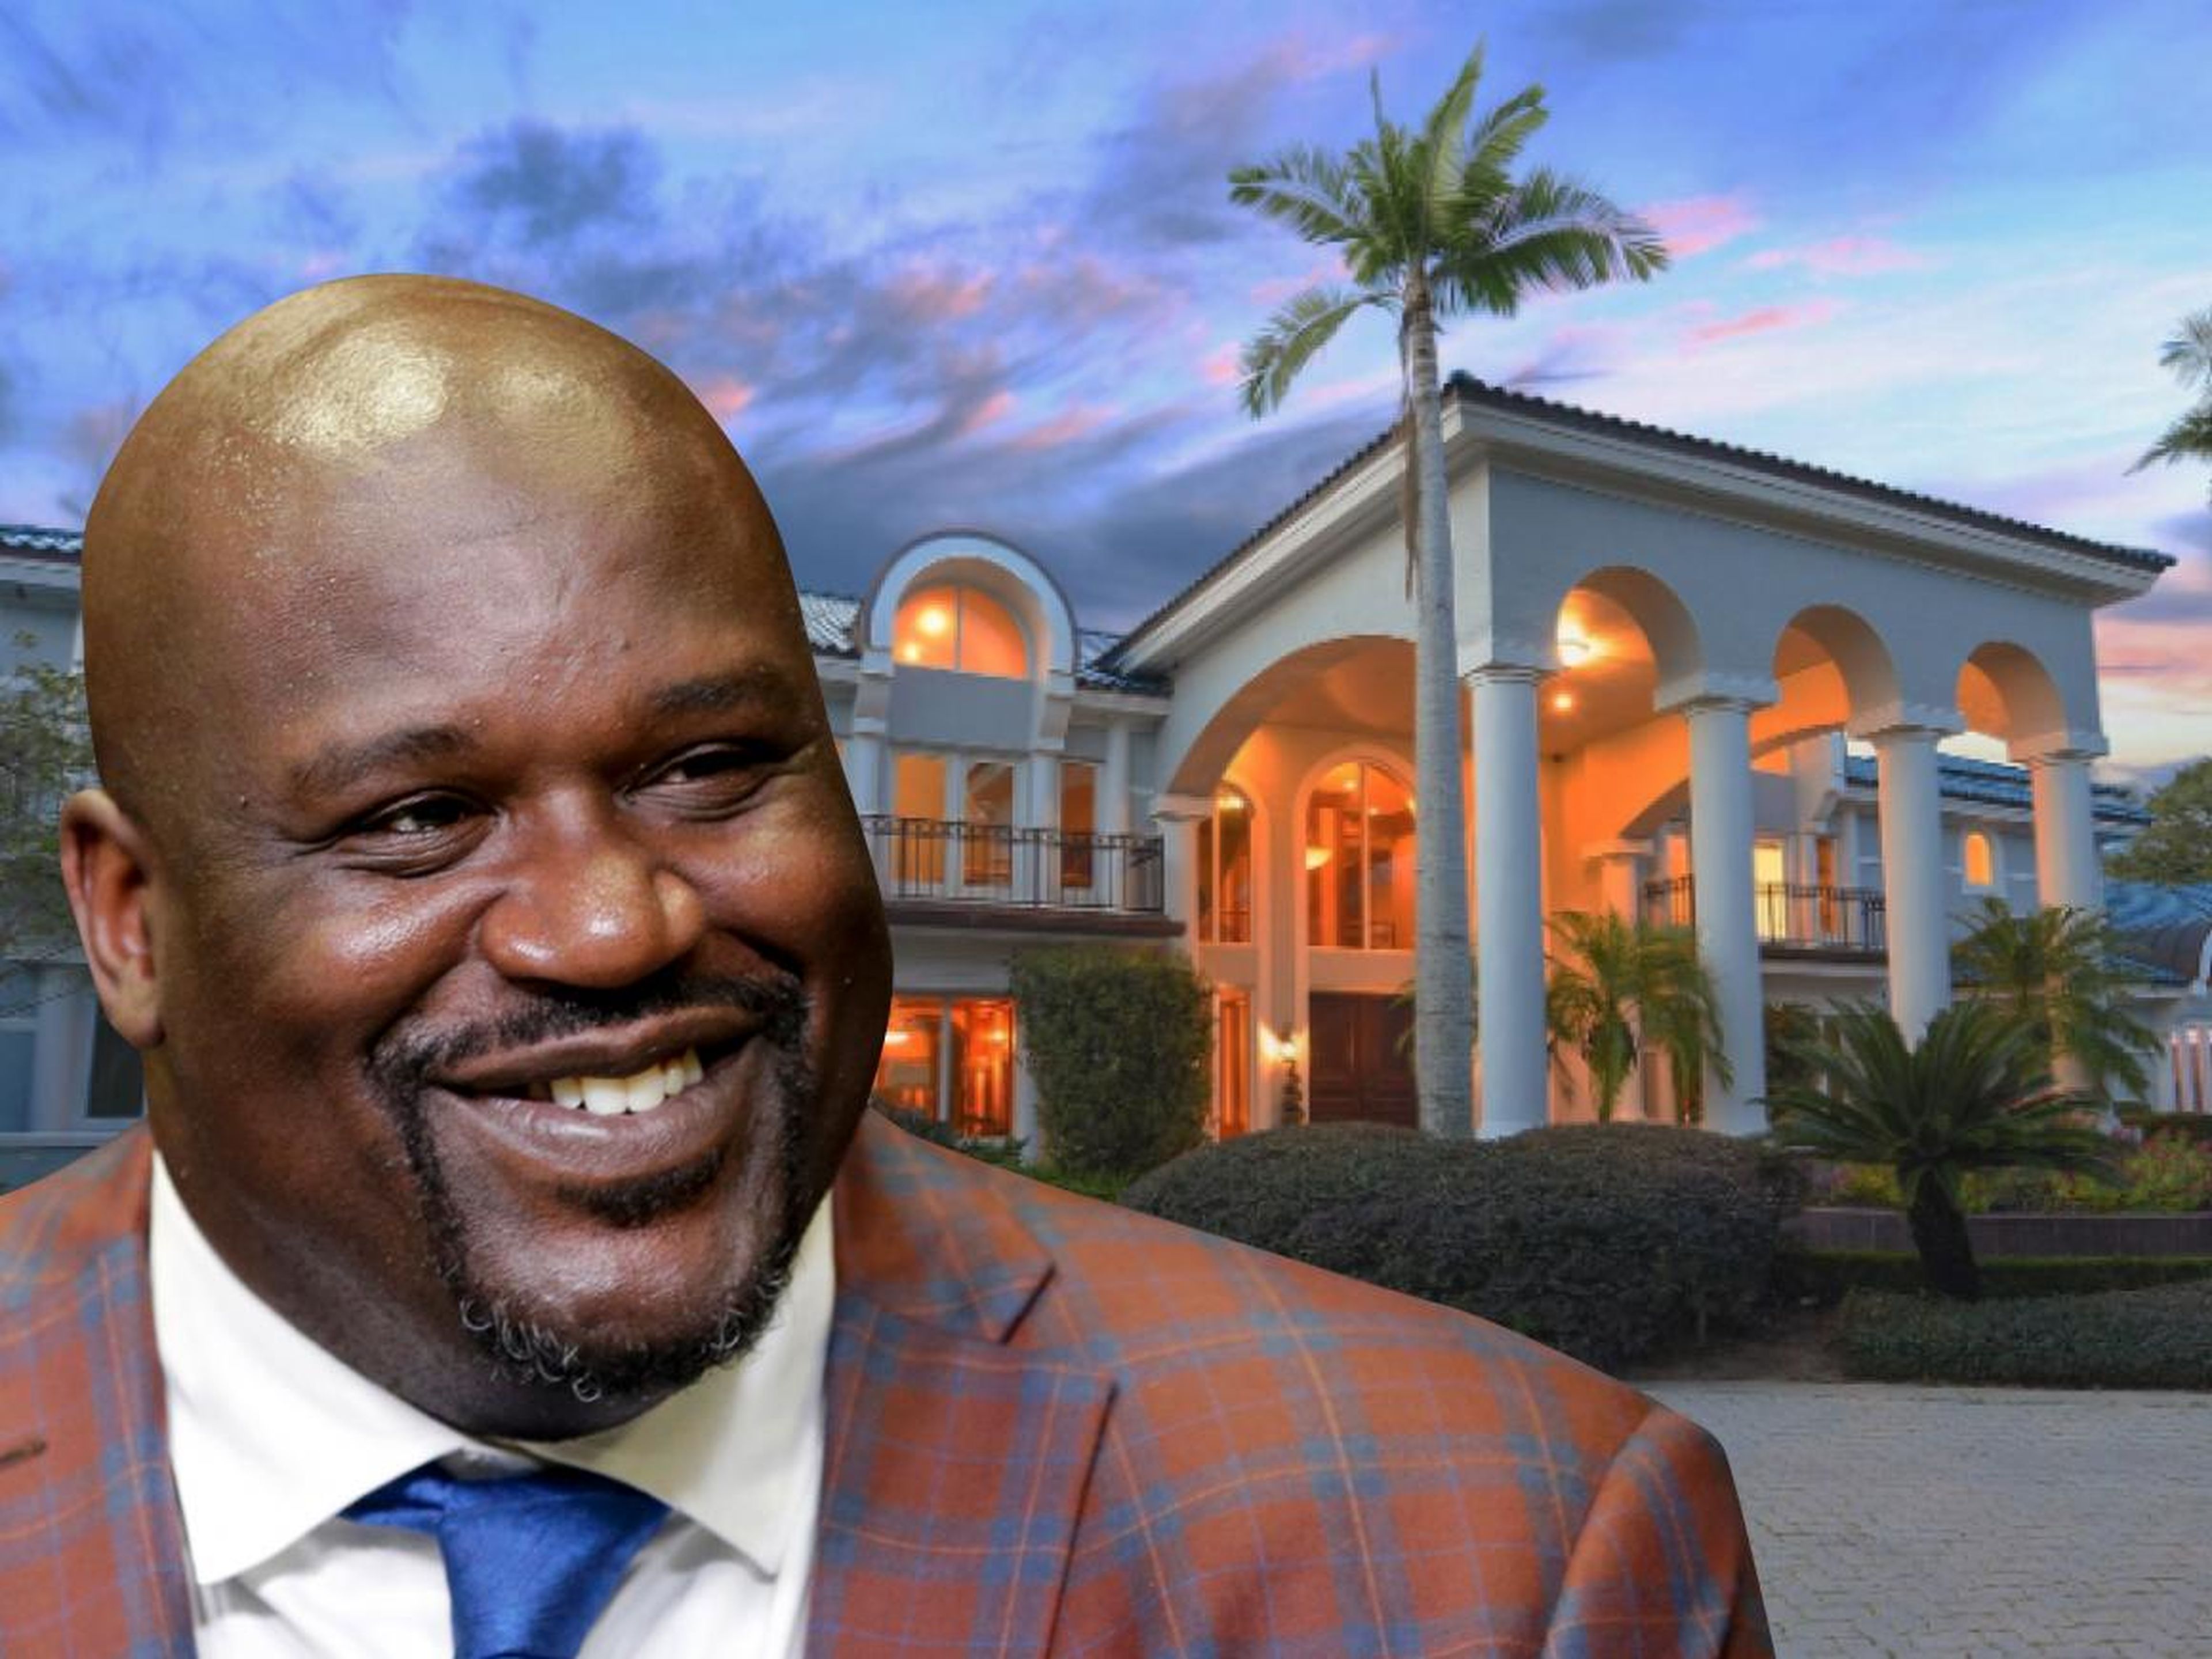 Williams isn't the only sports star living in a relatively affordable home. Shaquille O'Neal's $21.9 million Florida home, which sits on 700 feet of lakefront property in a gated Orlando community, was on the market in January.